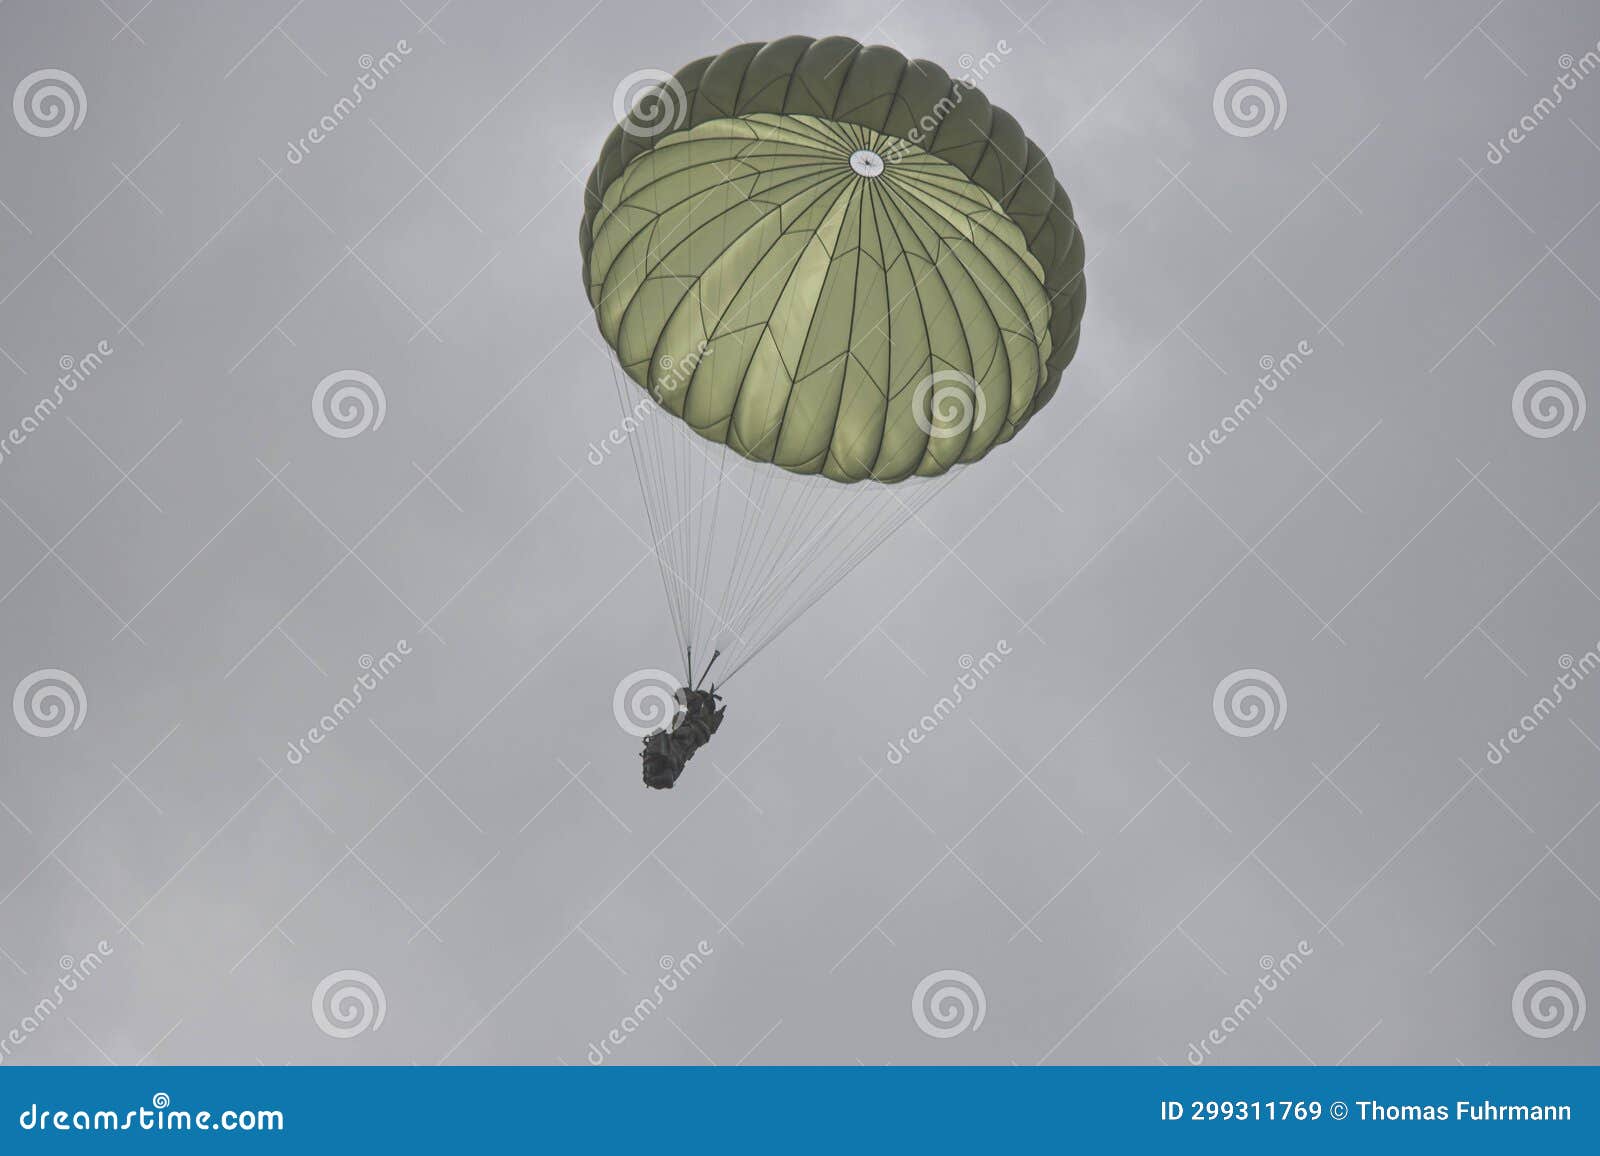 german bundeswehr paratroopers in camouflage during a parachute jump